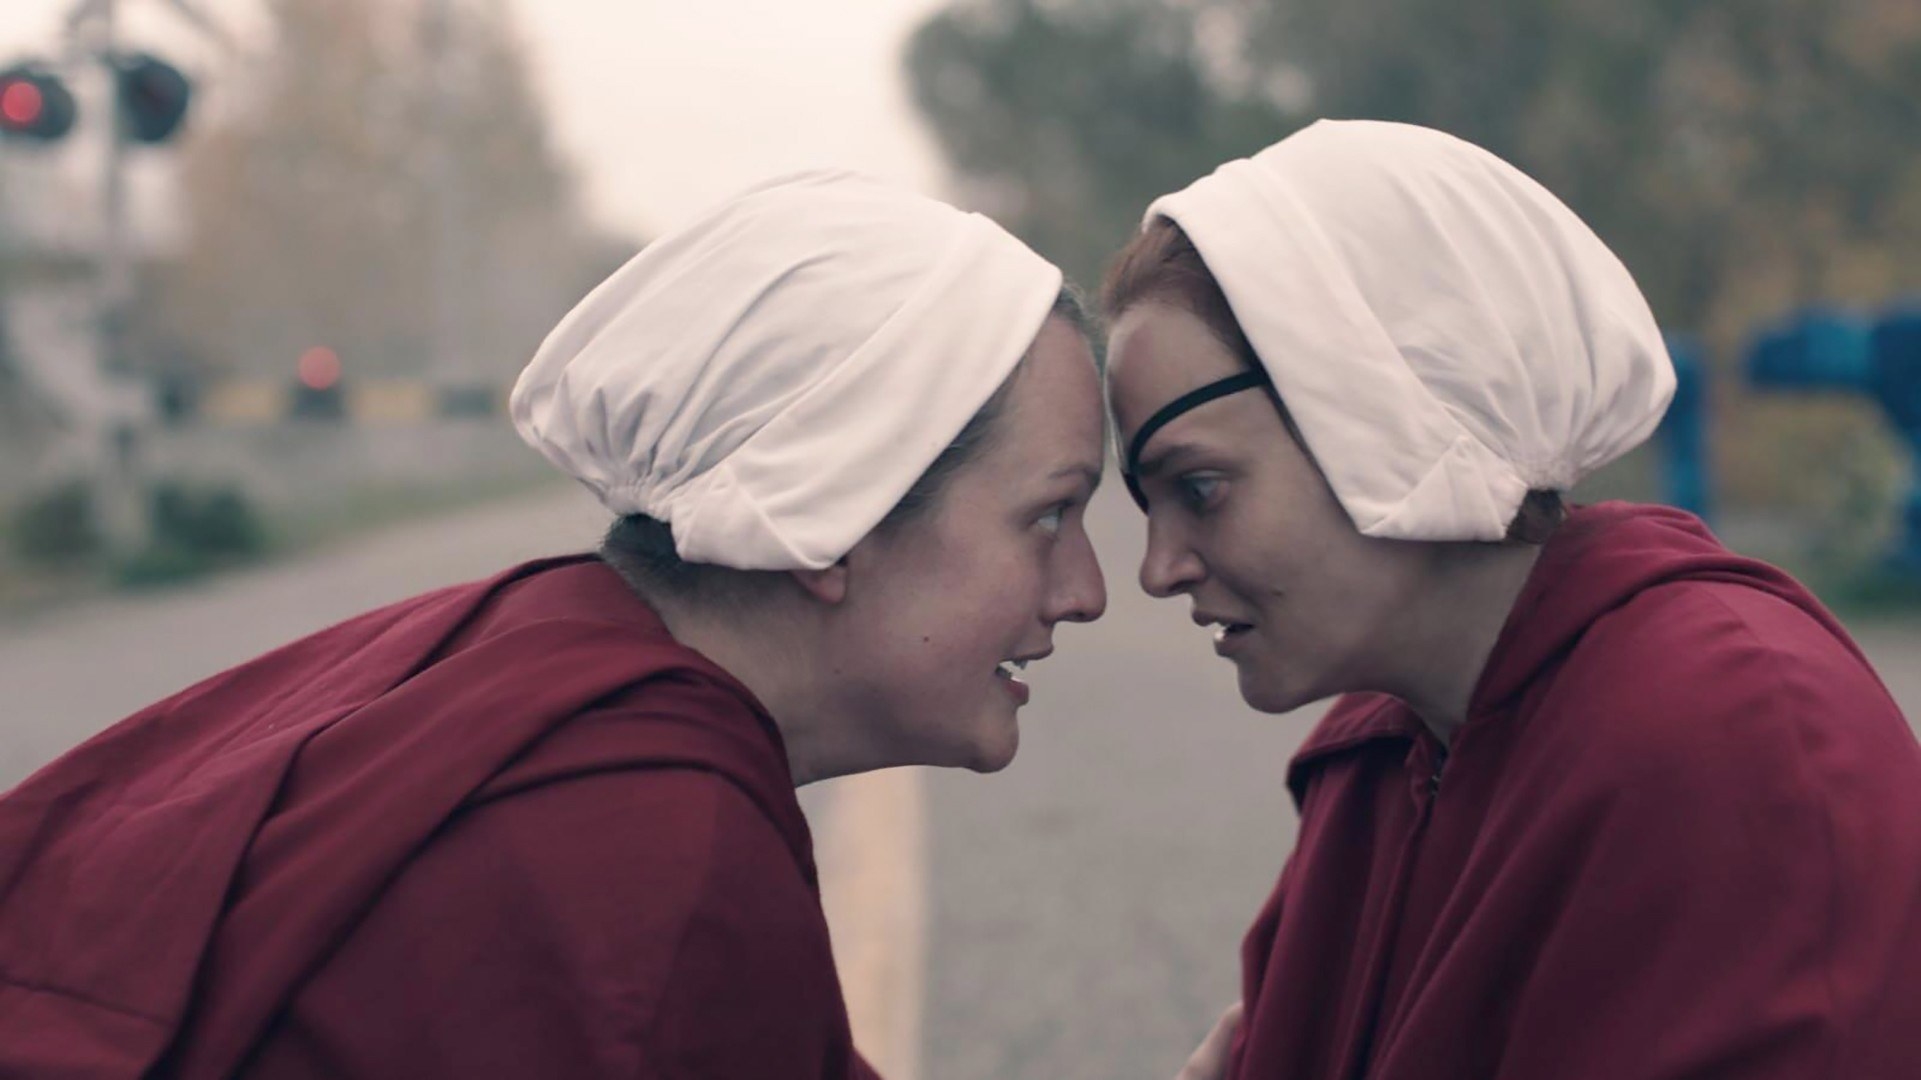 june and janine look each other closely in the eye while wearing their handmaid outfits